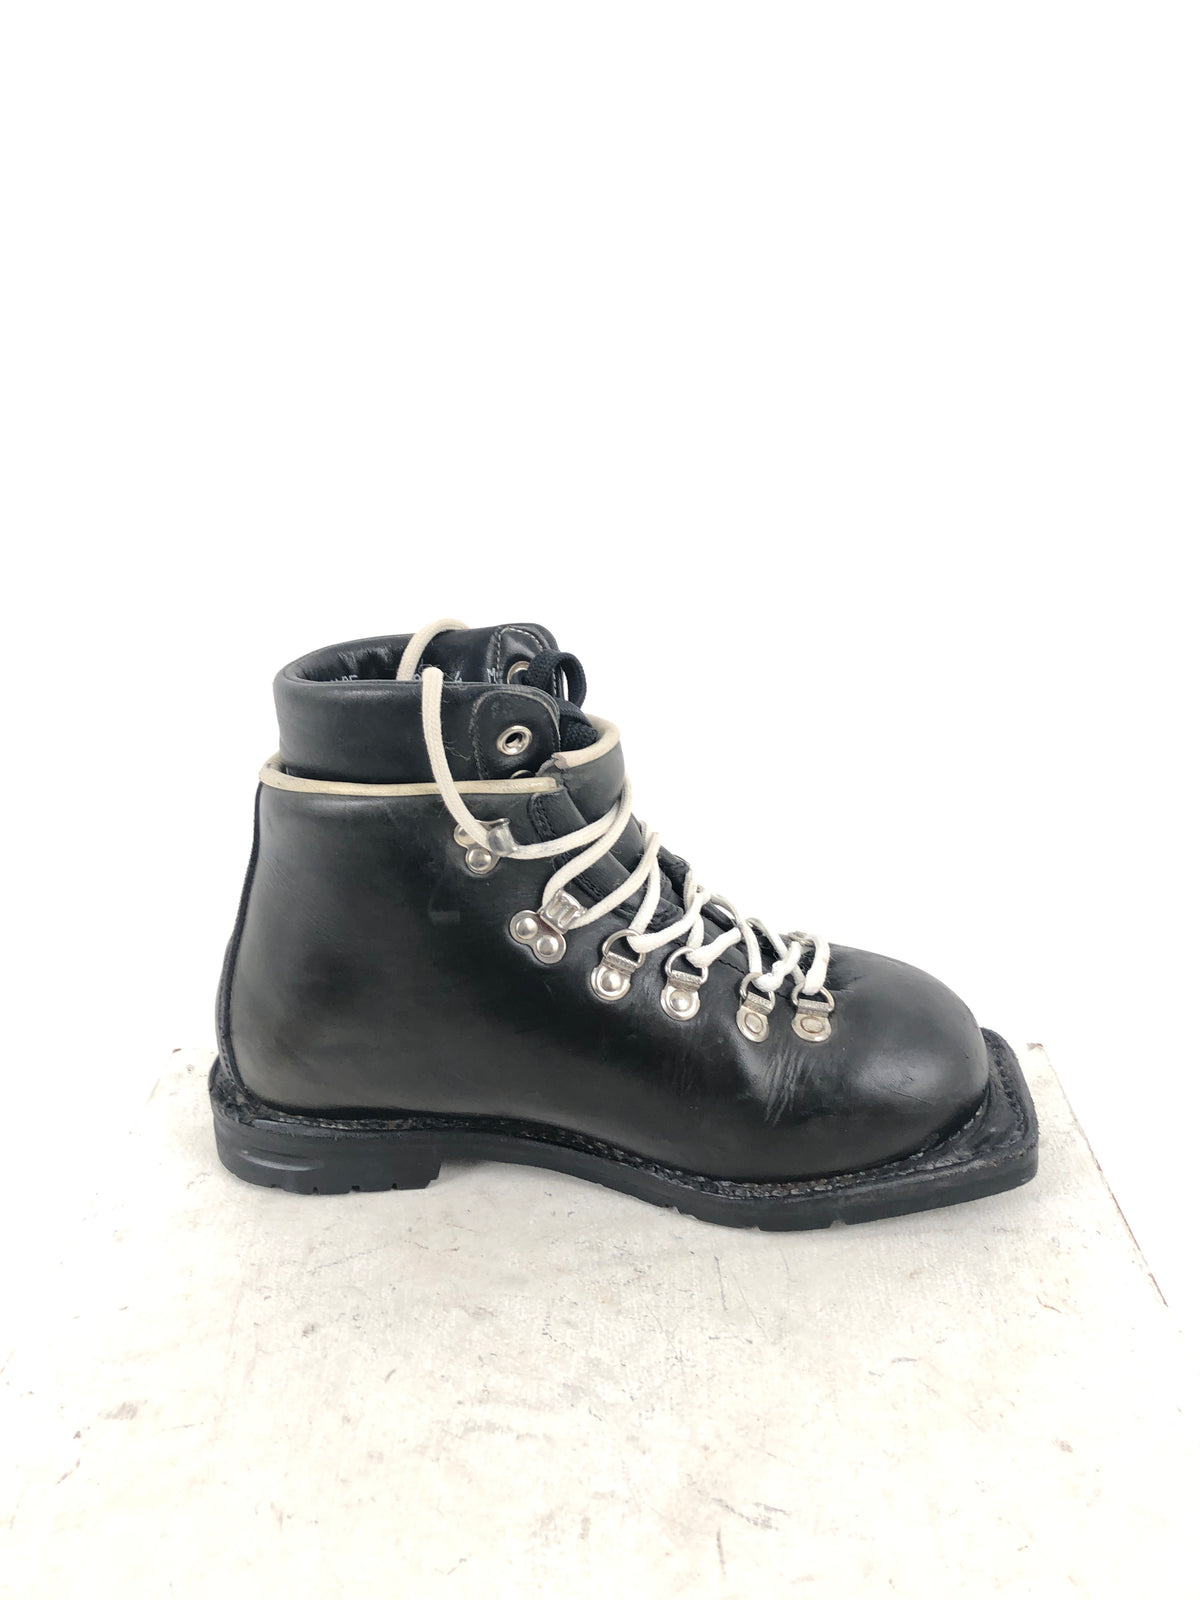 Size 4 Fabiano Double Leather Boots (Used)